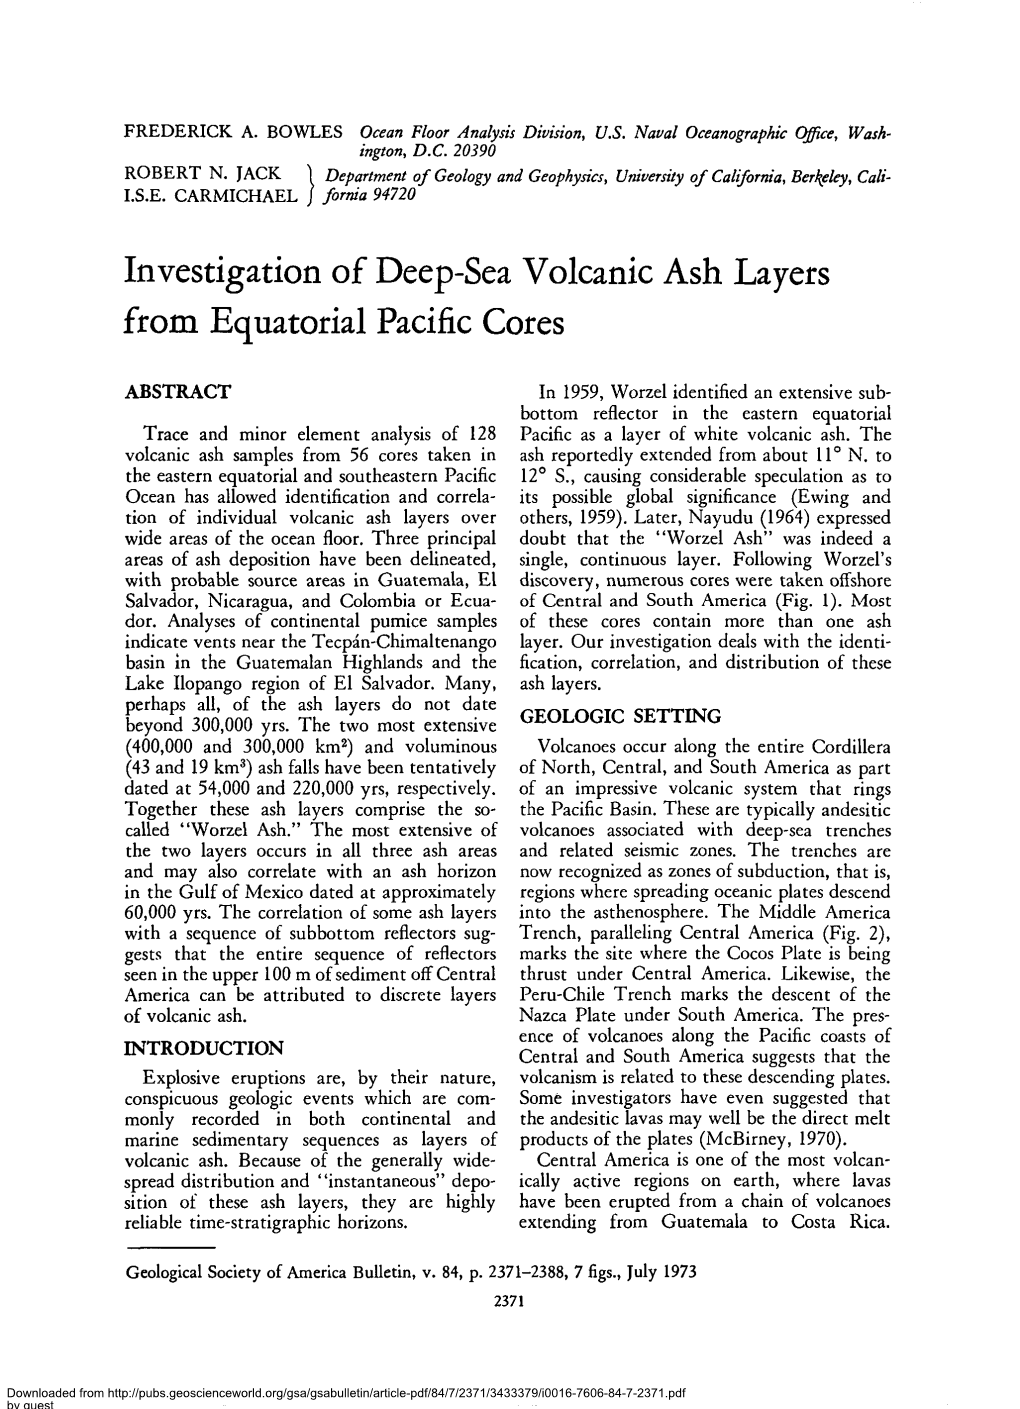 Investigation of Deep-Sea Volcanic Ash Layers from Equatorial Pacific Cores